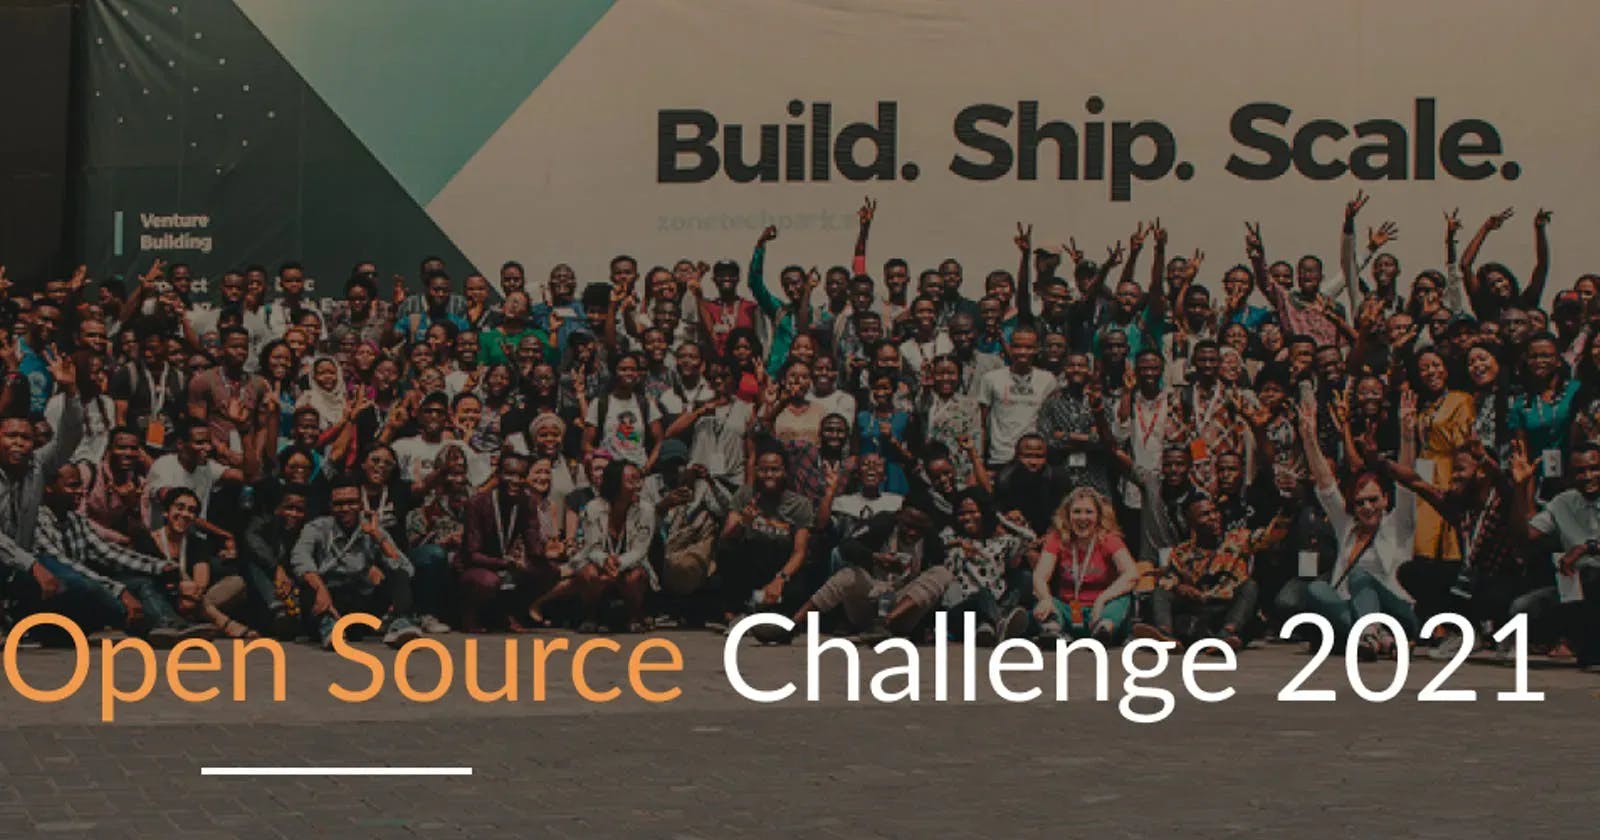 My Experience with the Open Source Challenge 2021